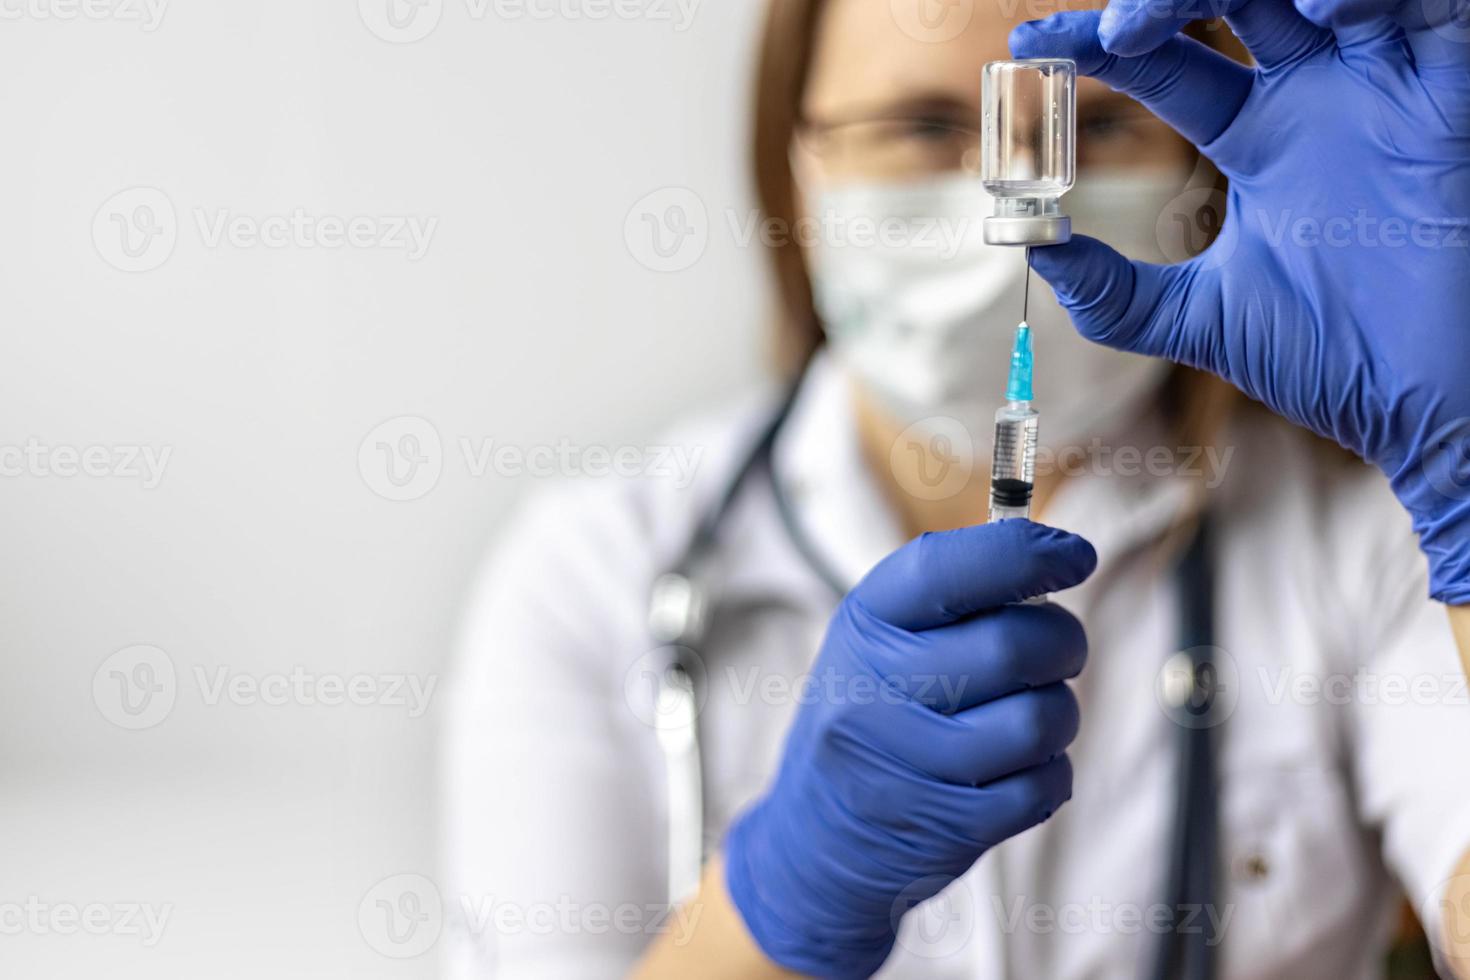 A female doctor wearing a medical mask draws the coronavirus vaccine into a syringe at the clinic.The concept of vaccination, immunization, prevention against Covid-19. photo